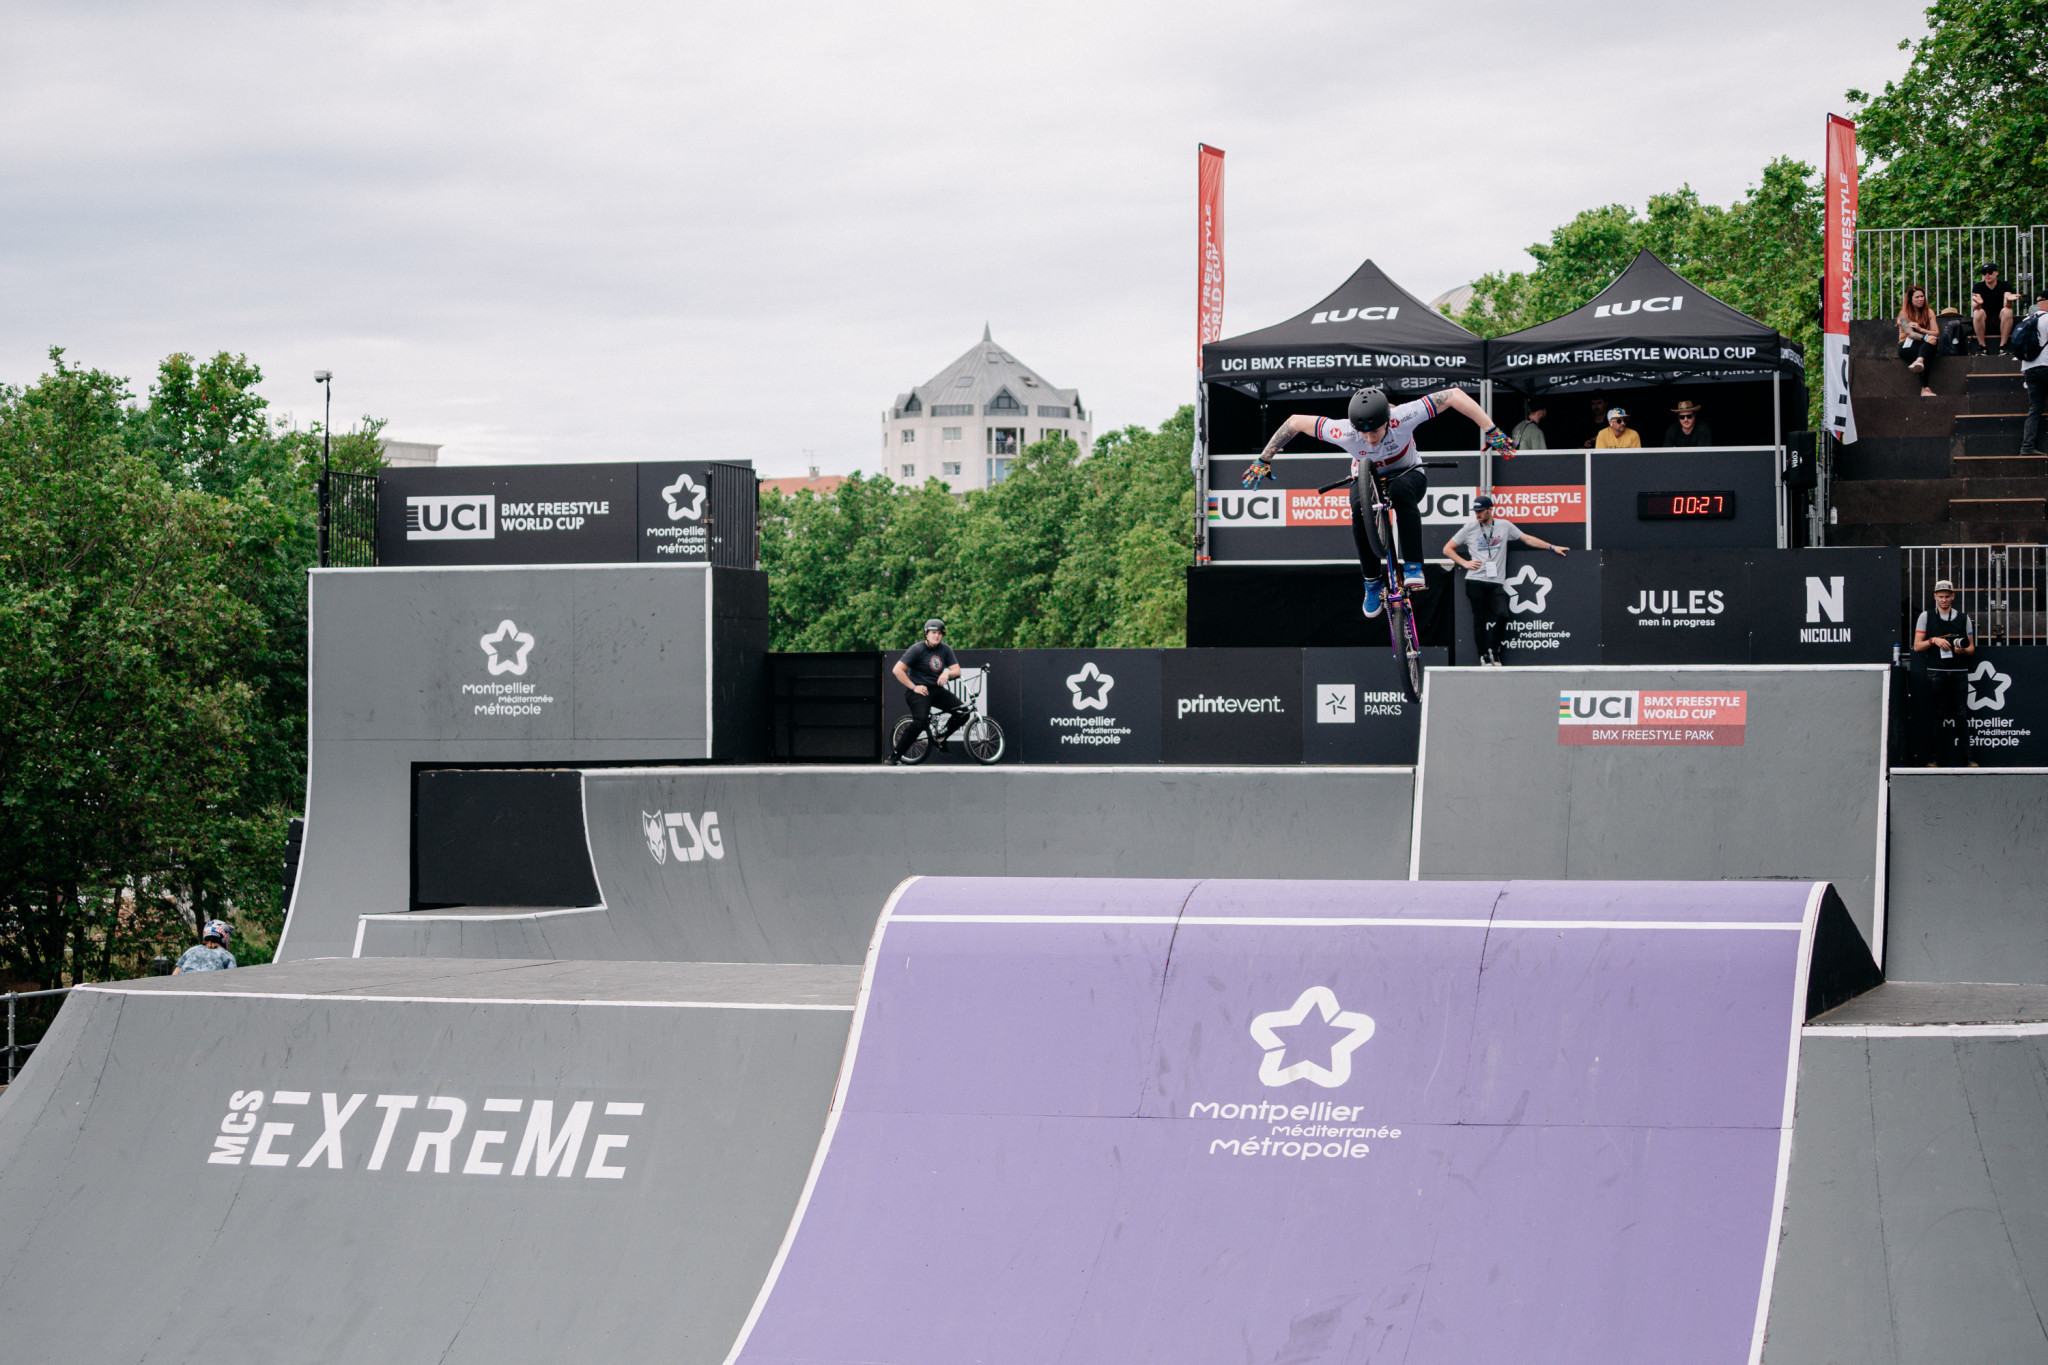 It was the British rider's first competition back since winning the historic gold medal at Tokyo 2020 ©Hurricane - FISE